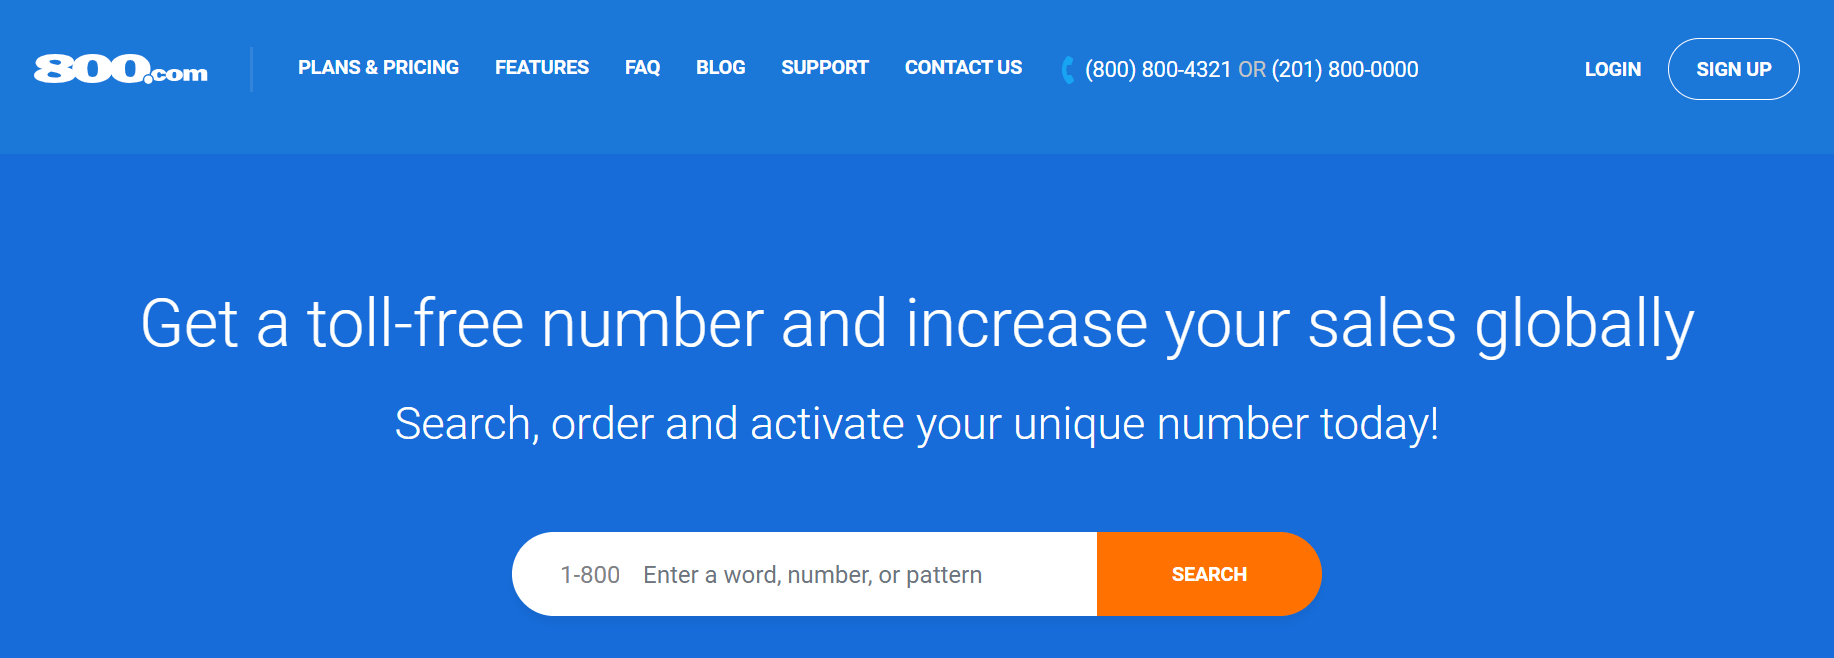 Get a toll-free number from the 800.com homepage.